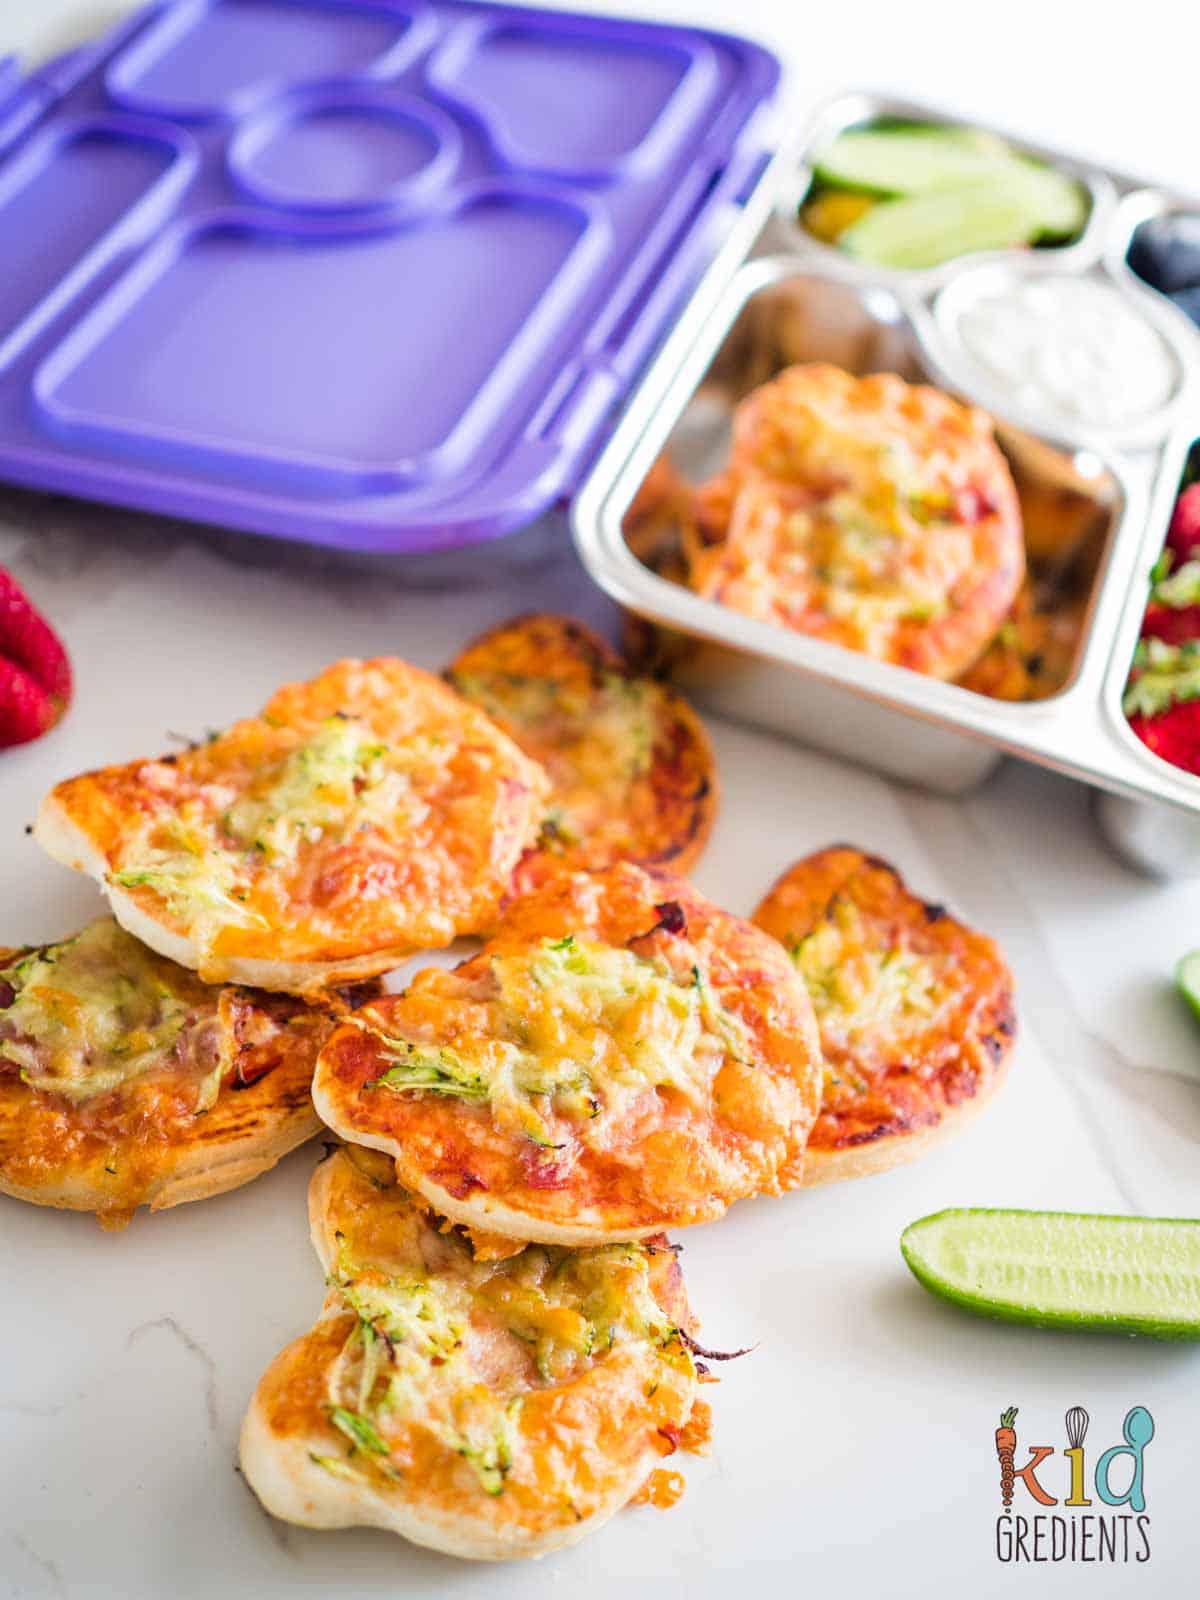 Lunchbox Mini Pizzas on the bench and in a lunchbox